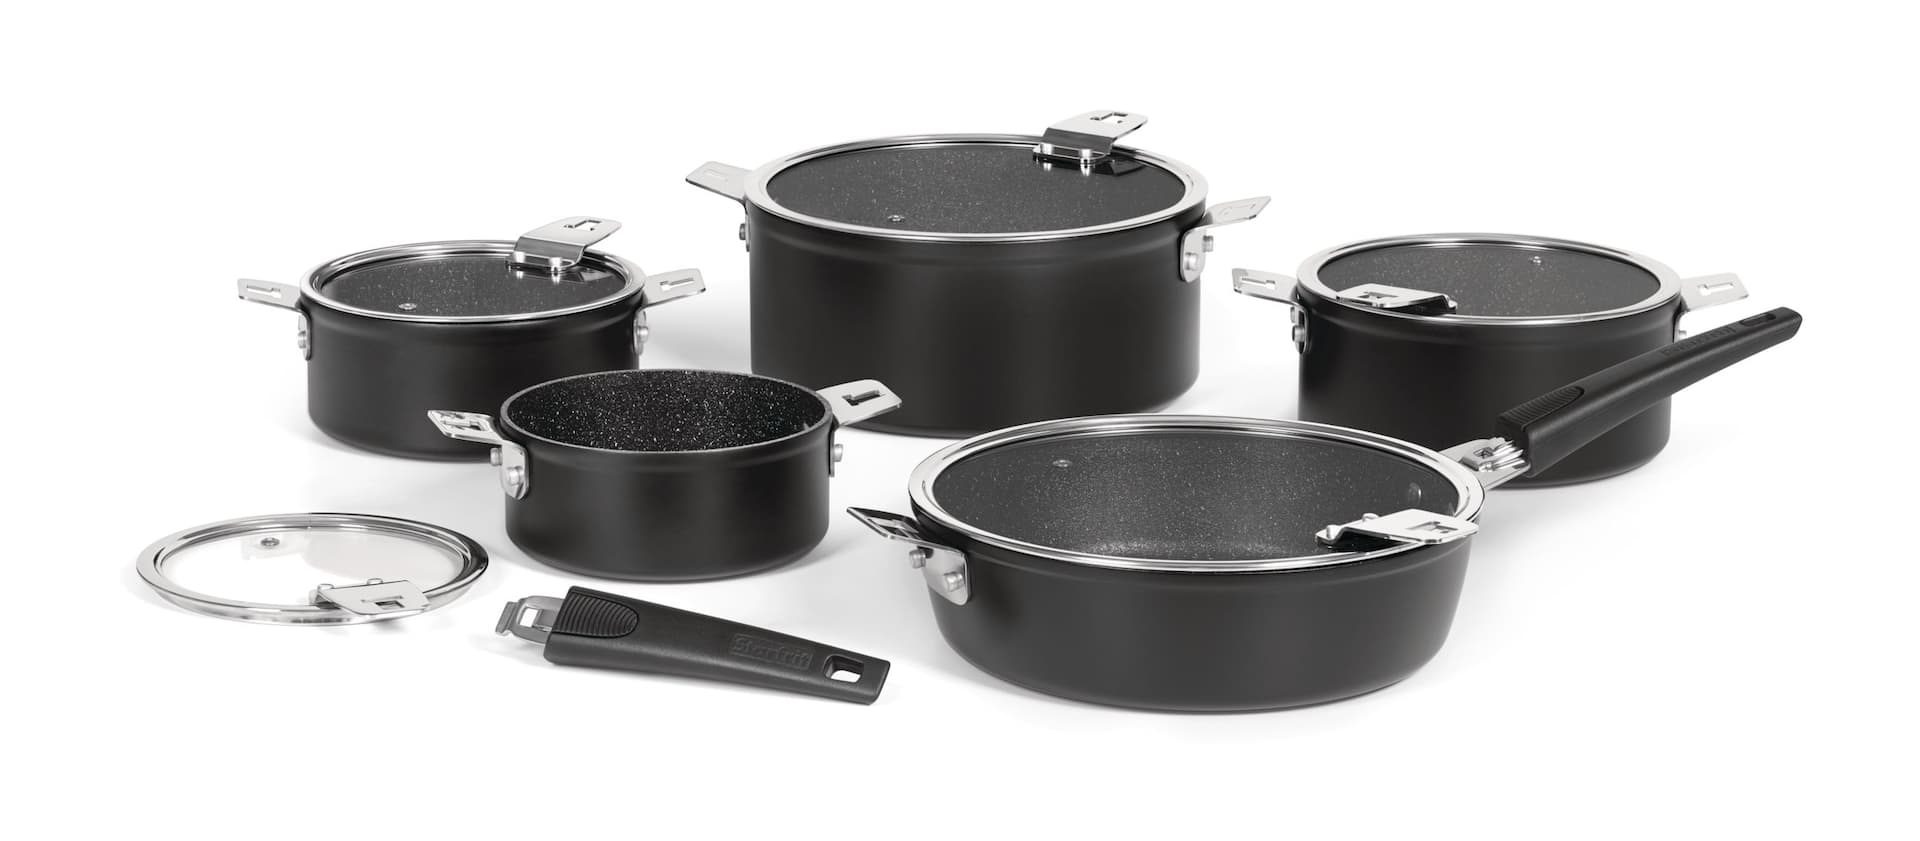 Kitchen Academy Detachable Handle Induction Cookware Sets - 10 Piece  Non-stick Pots and Pans Set with Removable Handle, Black Granite Cooking  Pans Set, Stackable RV Cookware for Camp